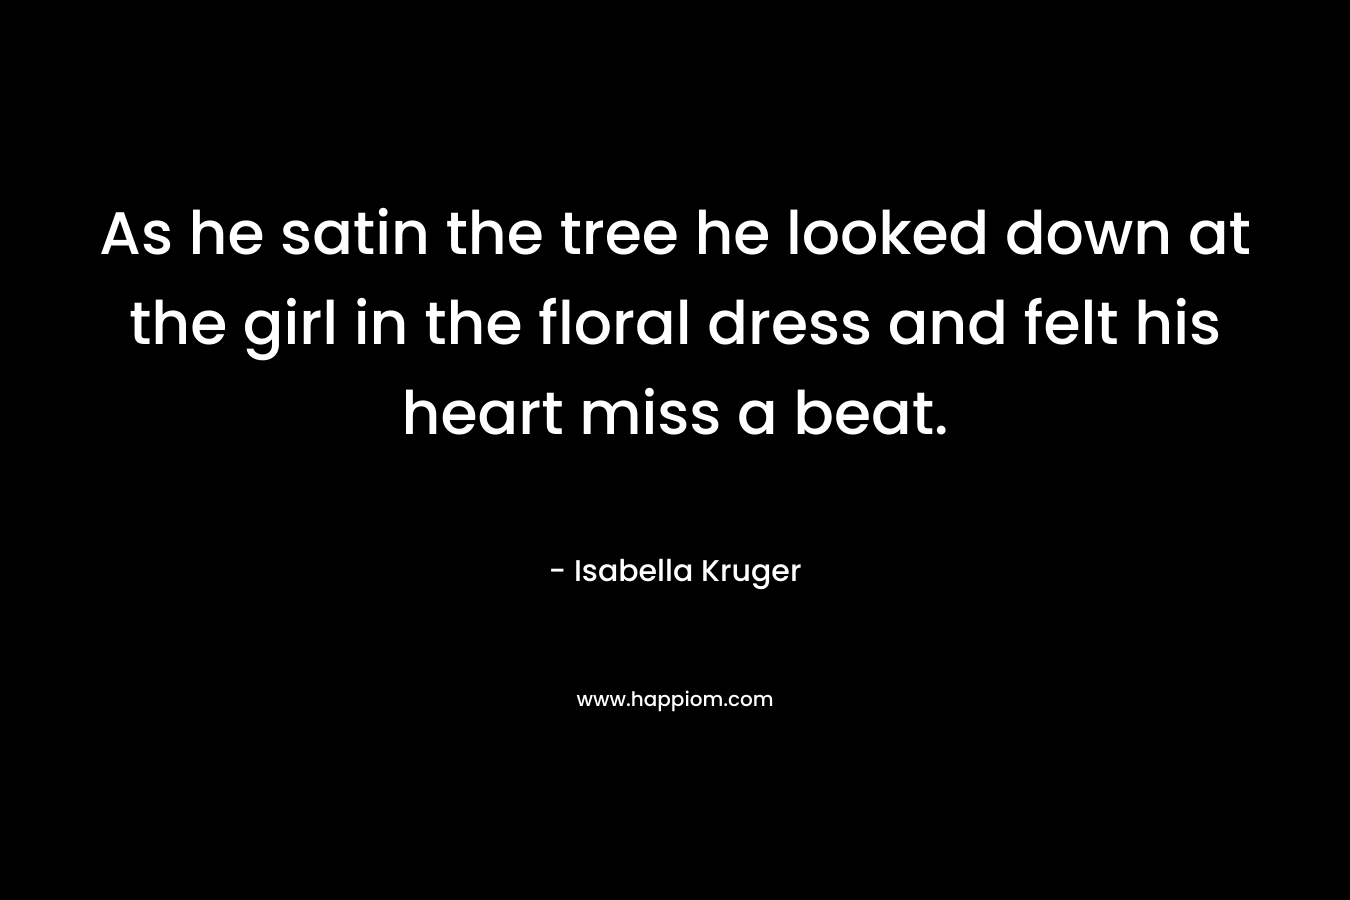 As he satin the tree he looked down at the girl in the floral dress and felt his heart miss a beat. – Isabella Kruger